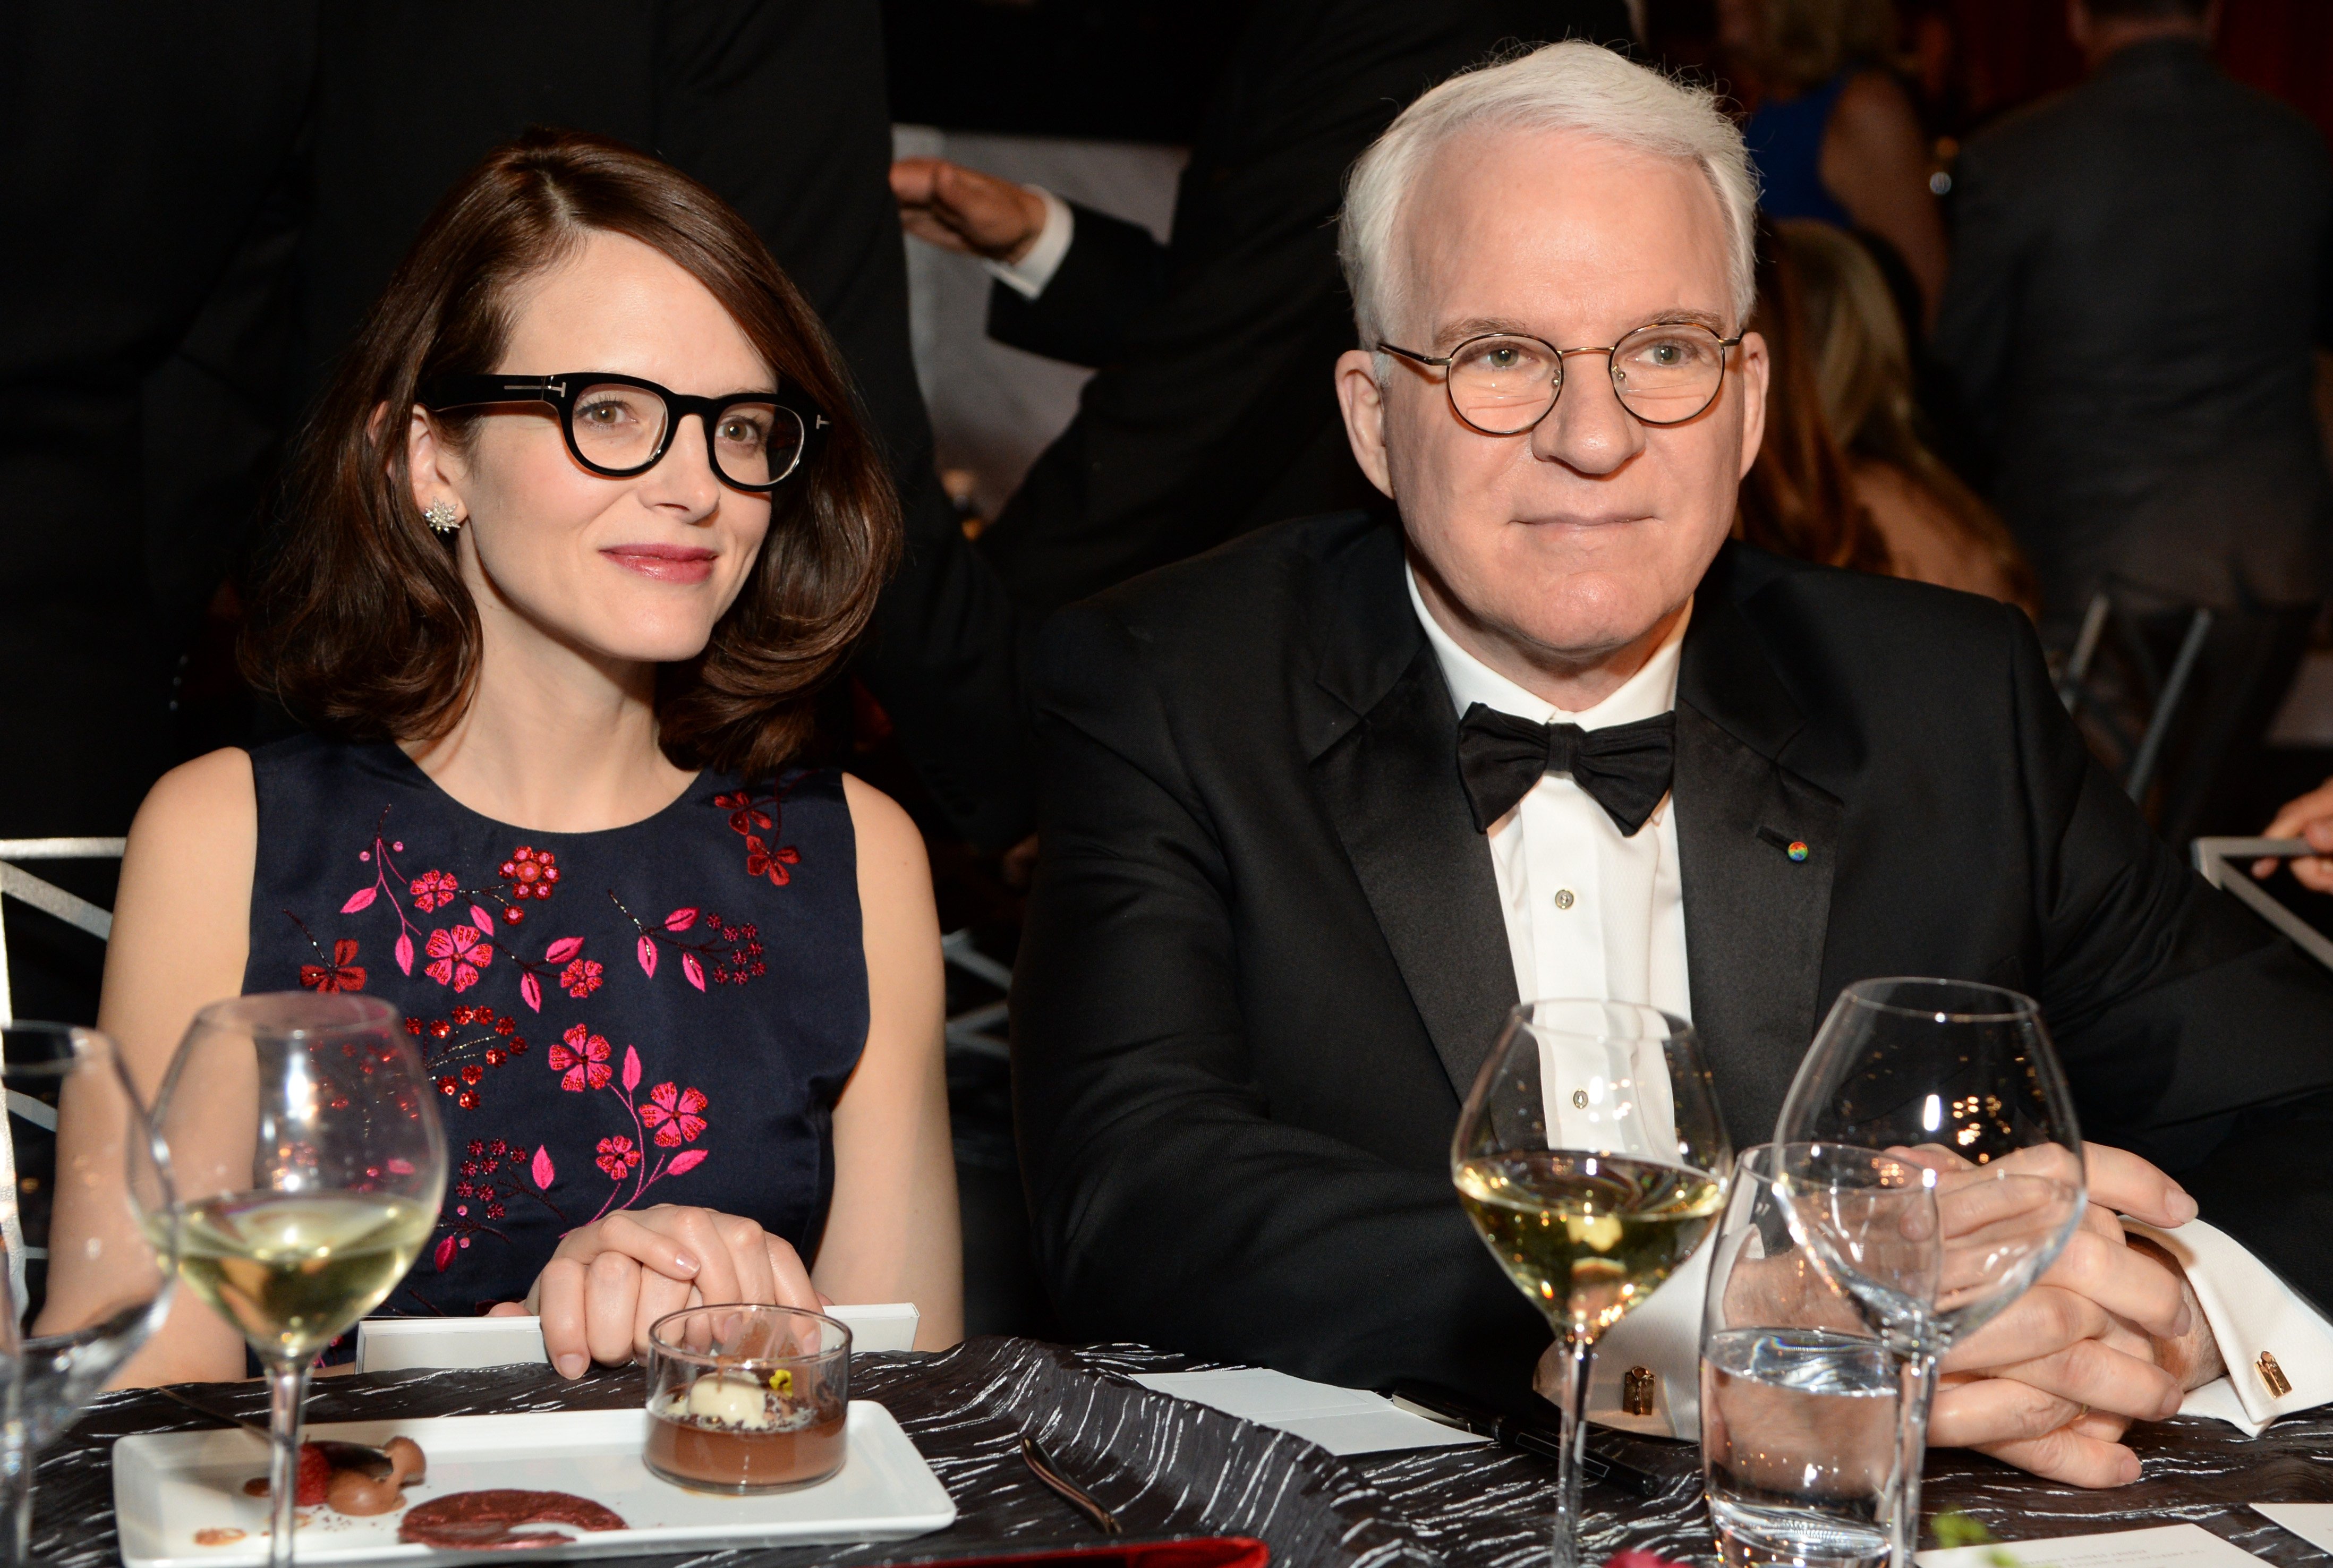 Writer Anne Stringfield (L) and honoree Steve Martin attend the 43rd AFI Life Achievement Award Gala honoring Steve Martin at Dolby Theatre on June 4, 2015 in Hollywood, California. | Source: Getty Images